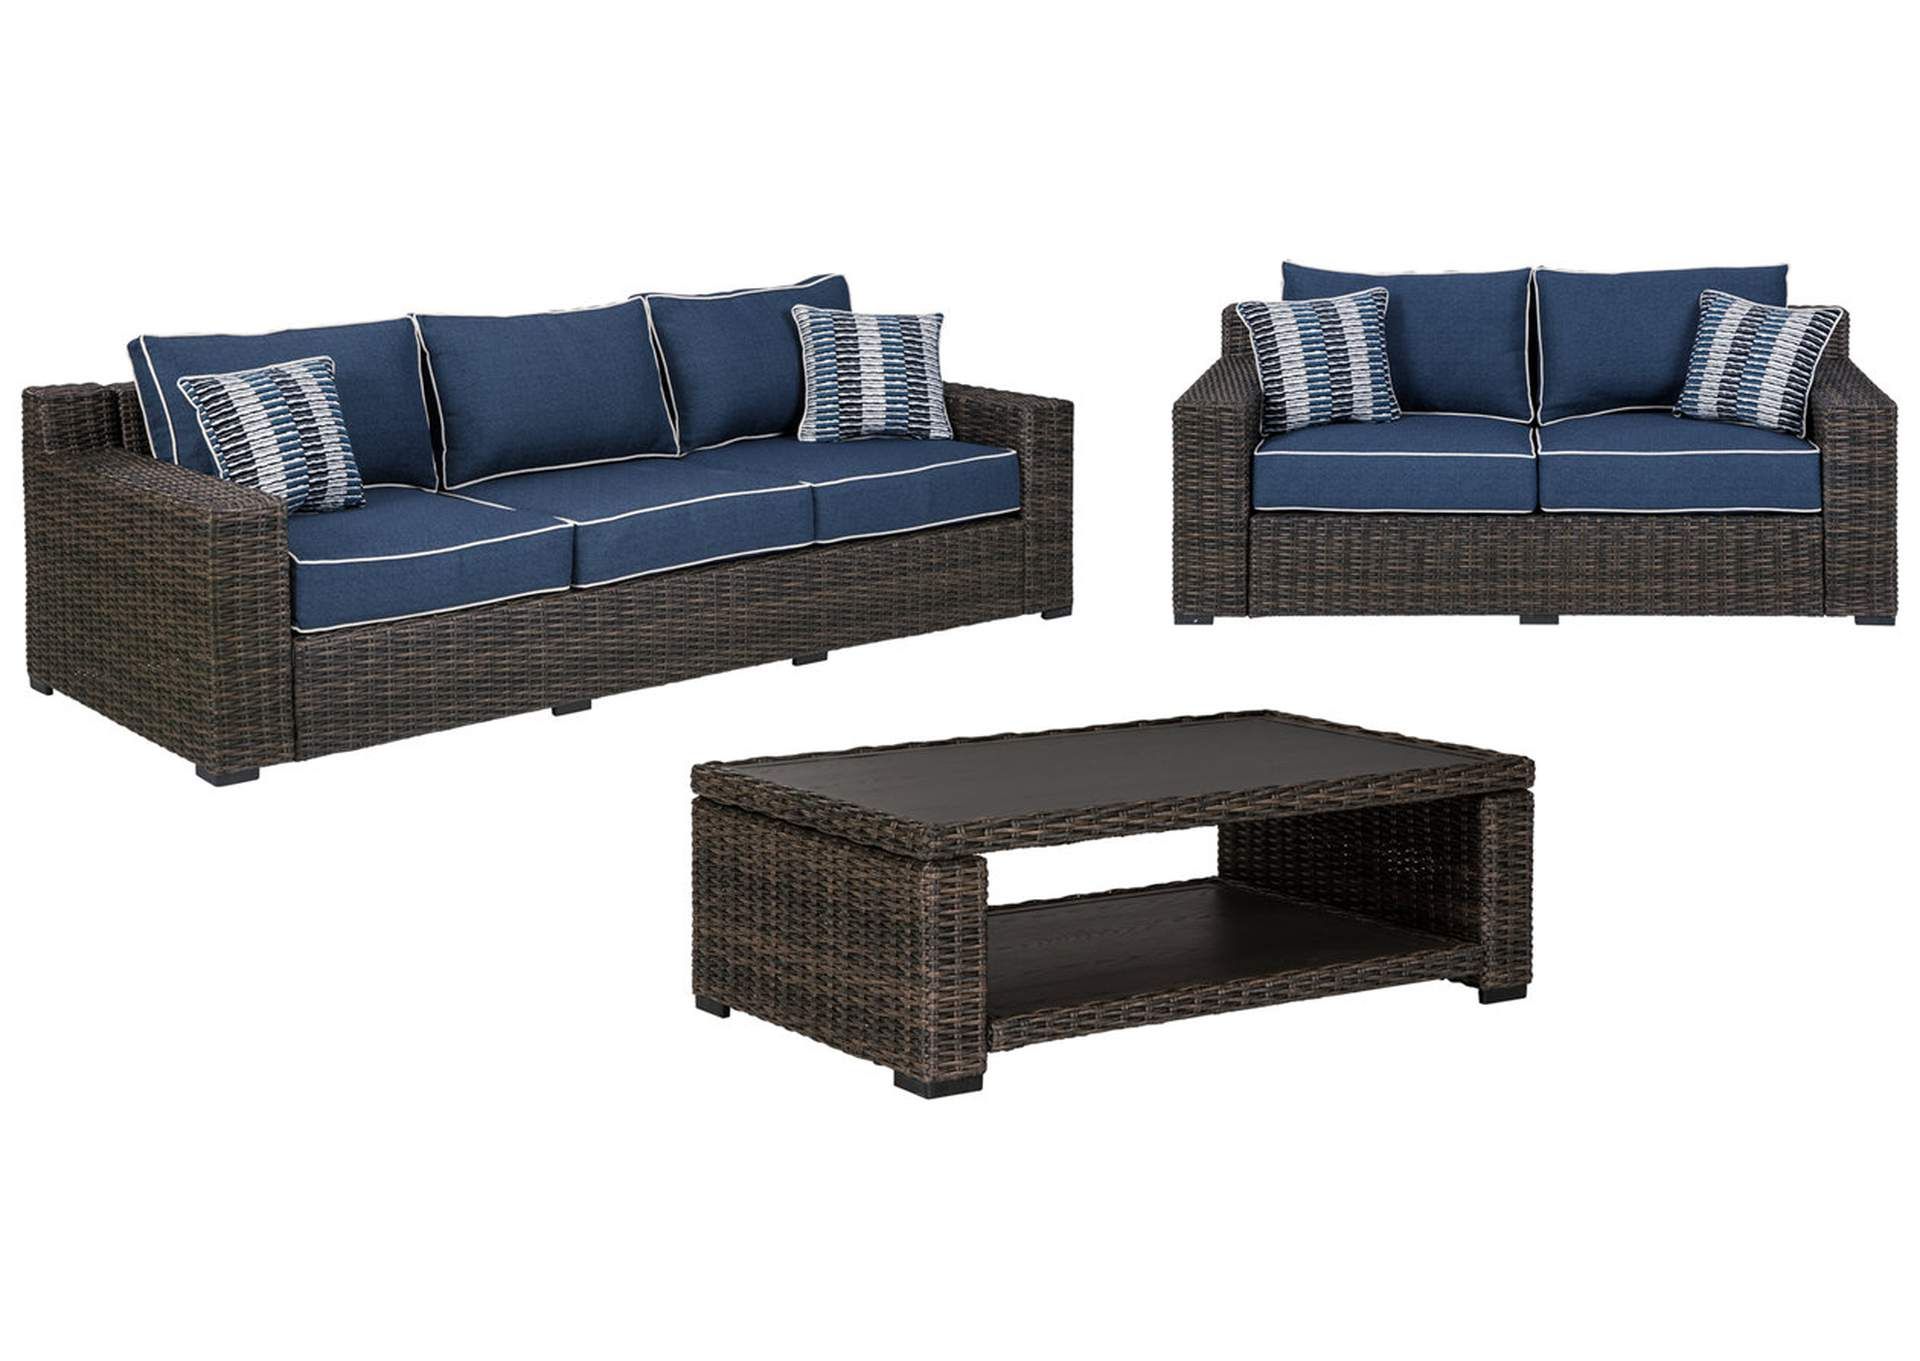 Grasson Lane Outdoor Sofa And Loveseat With Coffee Table Cohen's Furniture  – New Castle, De For Outdoor Cushioned Chair Loveseat Tables (View 13 of 15)